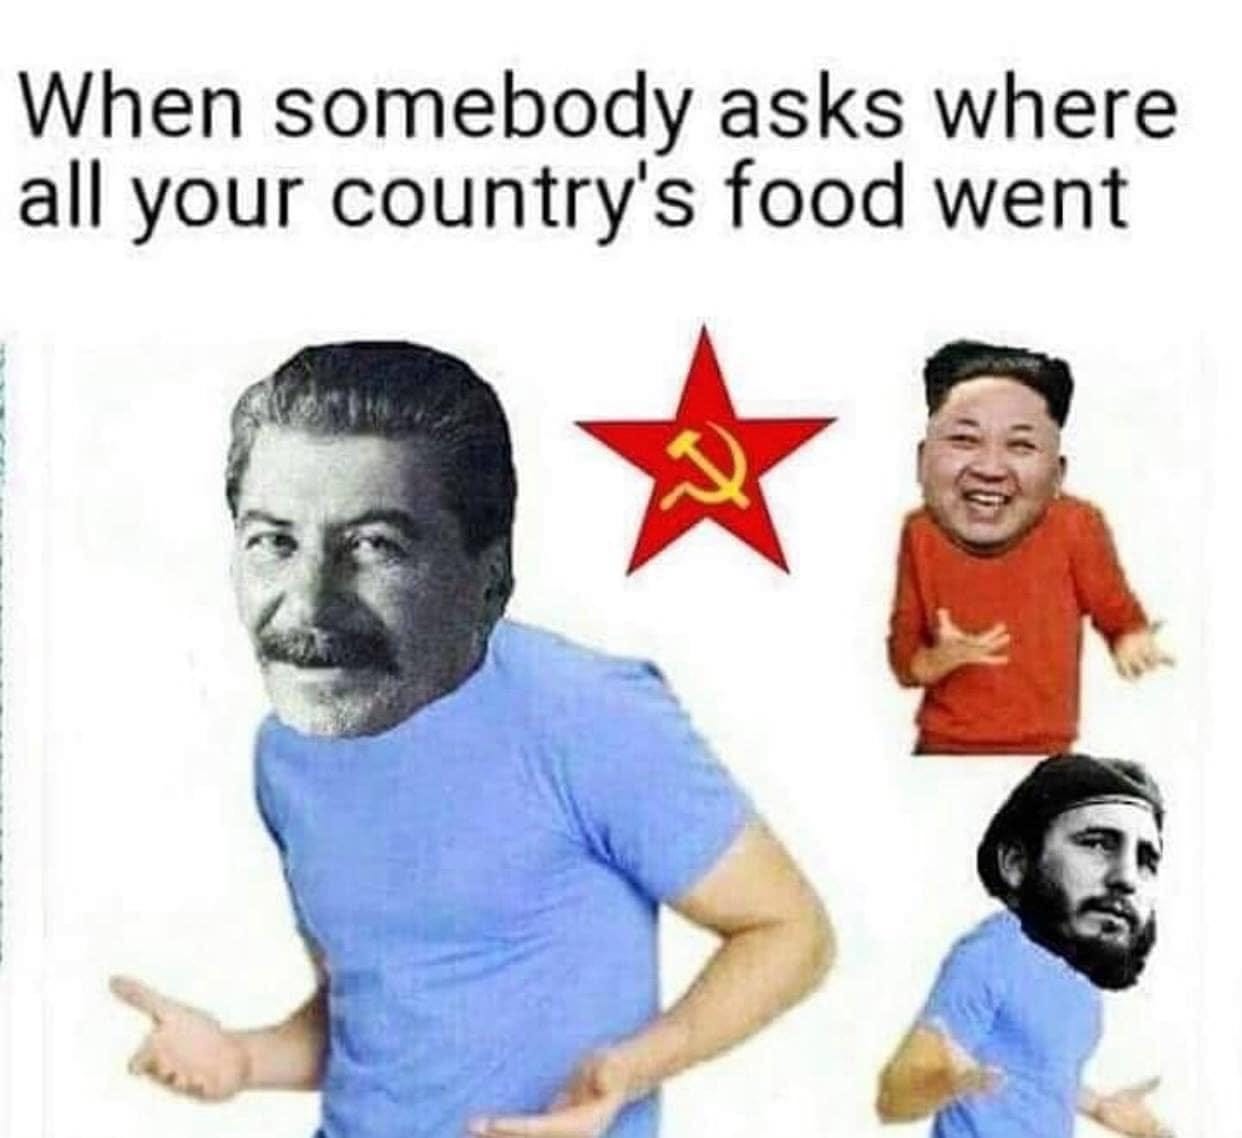 May be a meme of 3 people and text that says 'When somebody asks where all your country's food went +'